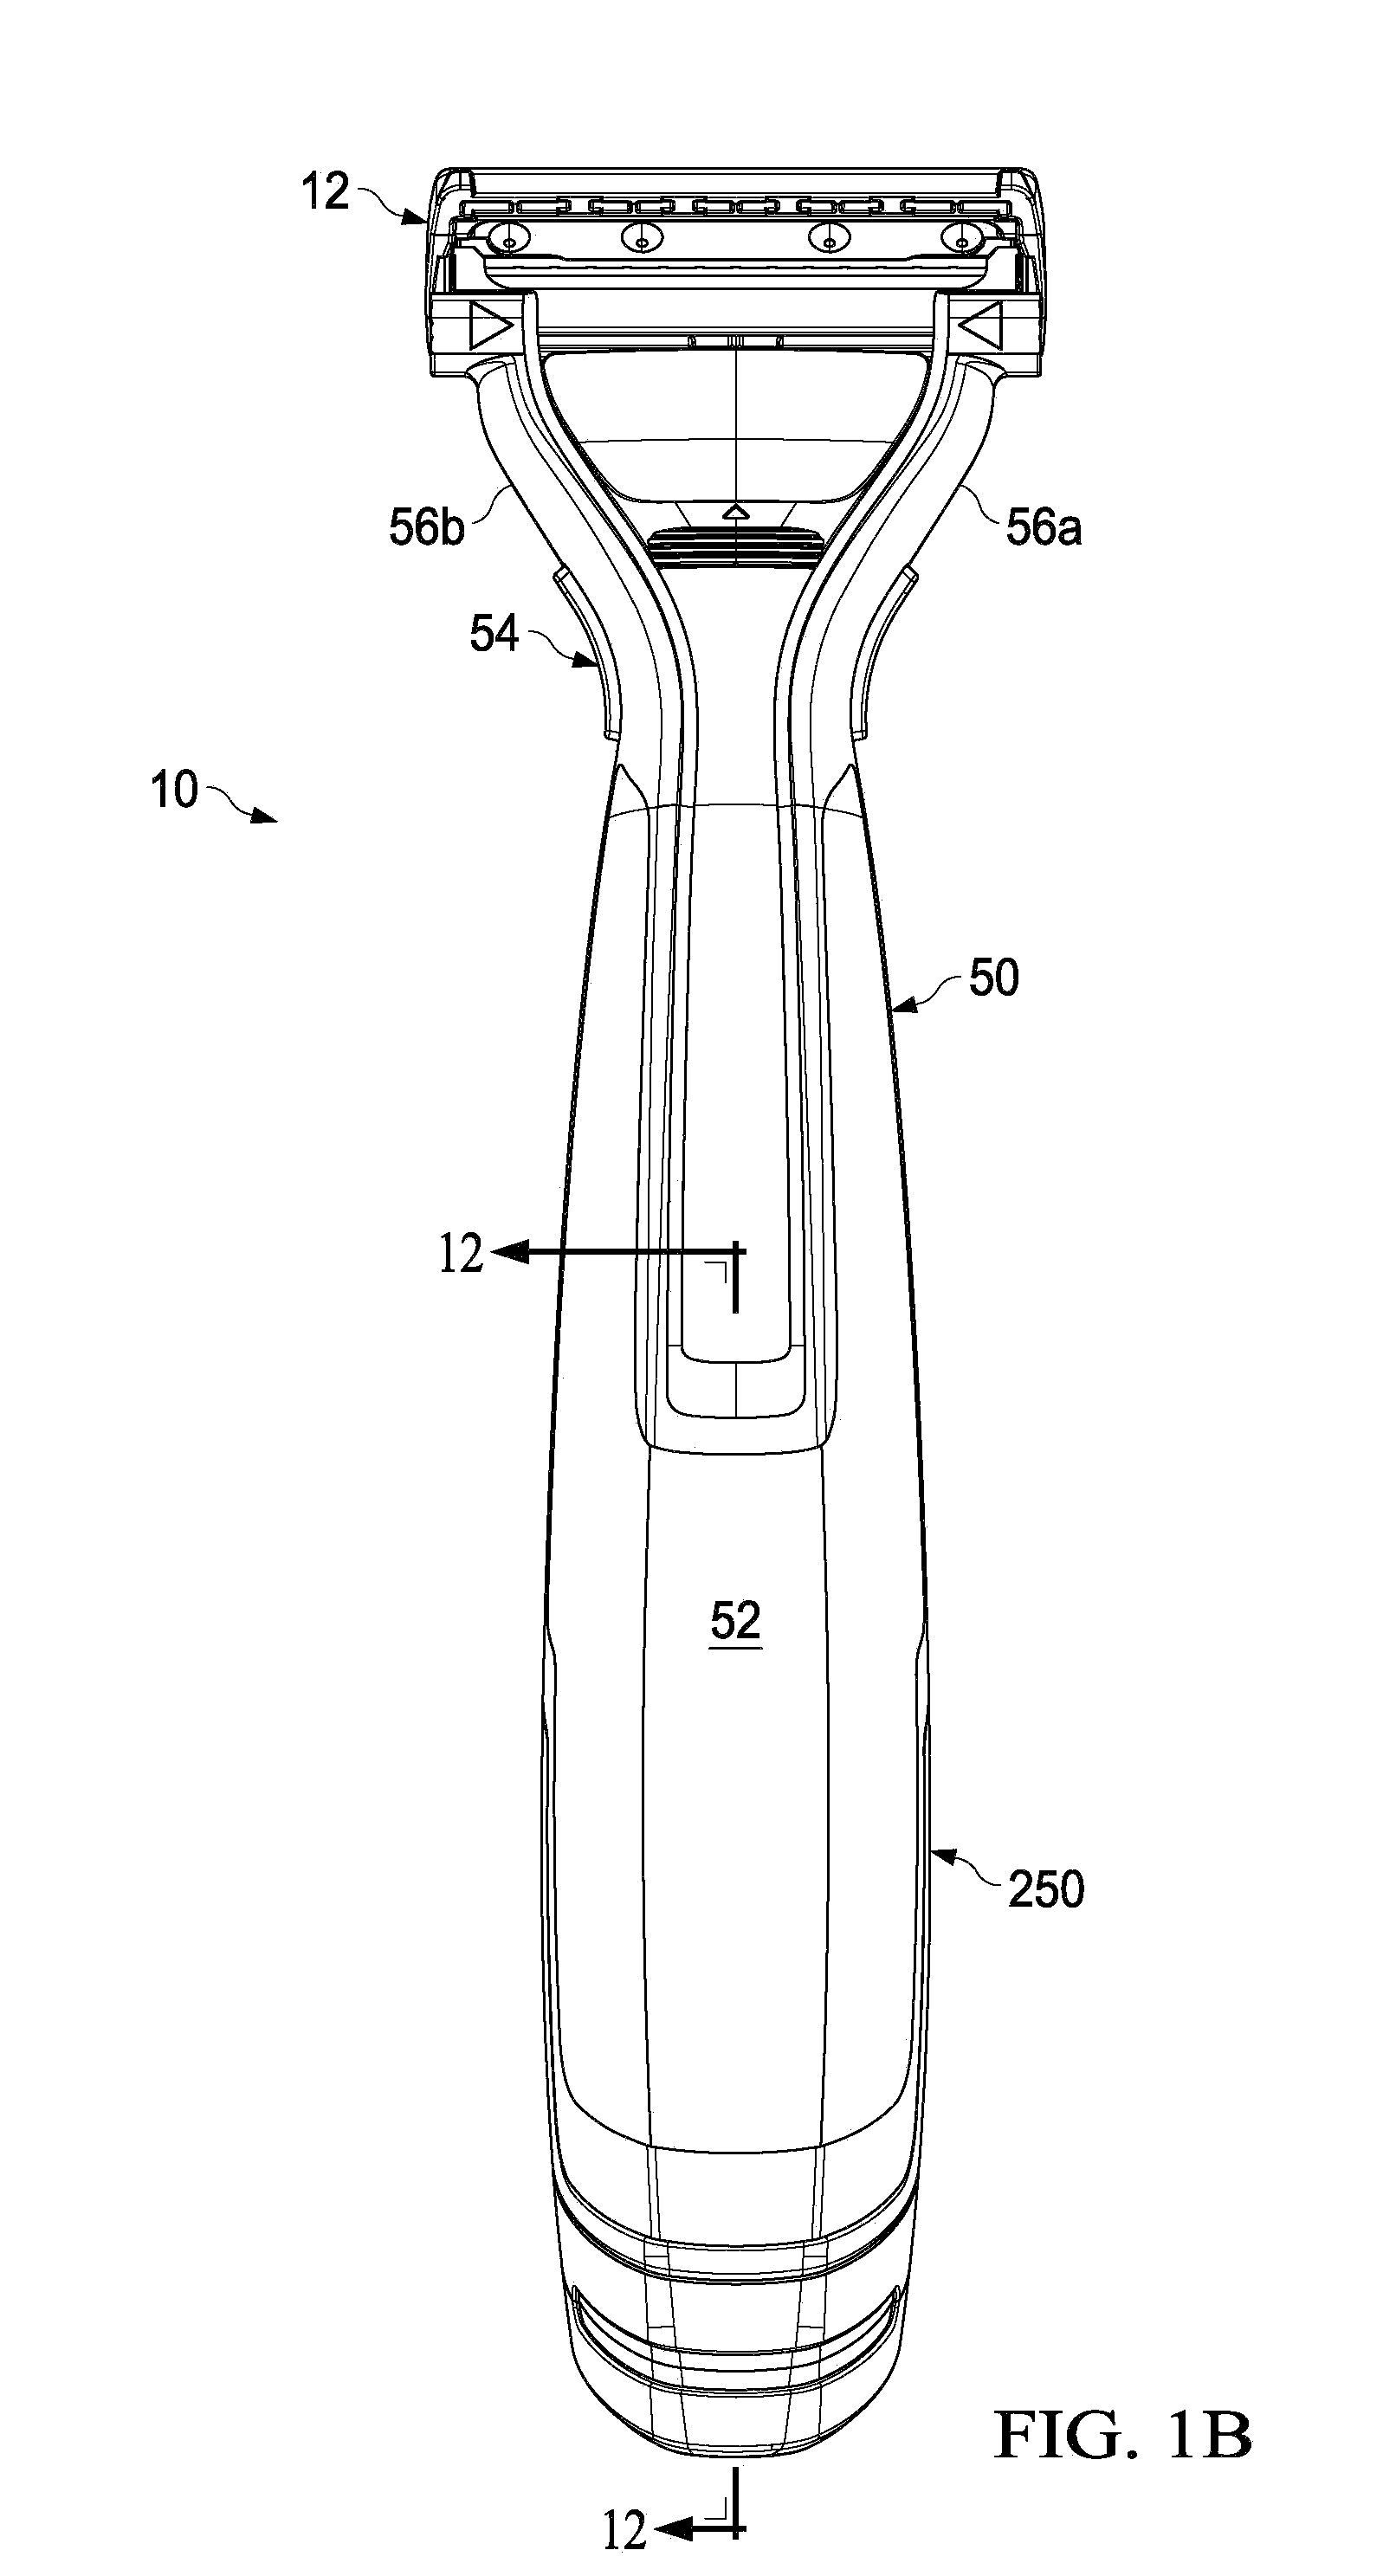 Hair removal device with cartridge retention cover